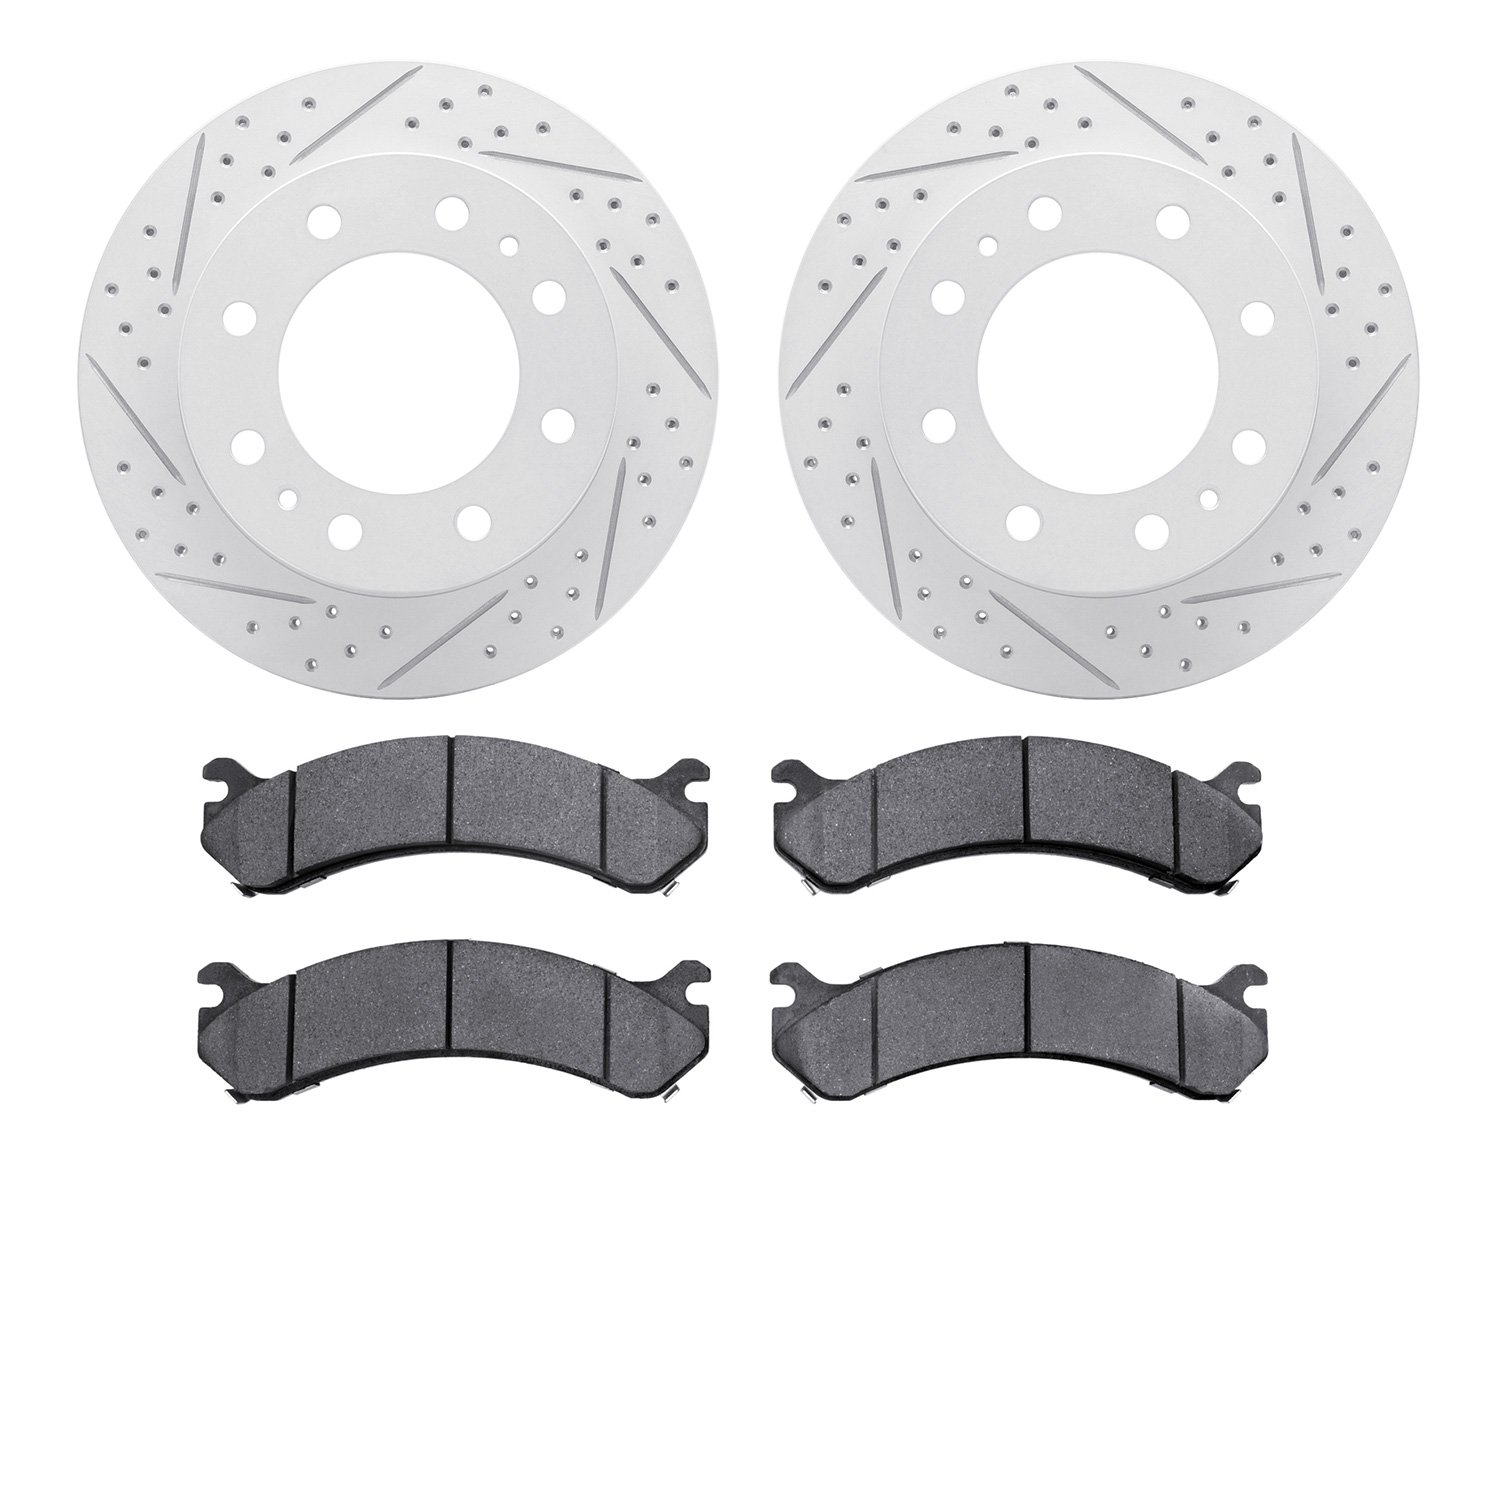 2202-48050 Geoperformance Drilled/Slotted Rotors w/Heavy-Duty Pads Kit, 2001-2020 GM, Position: Front